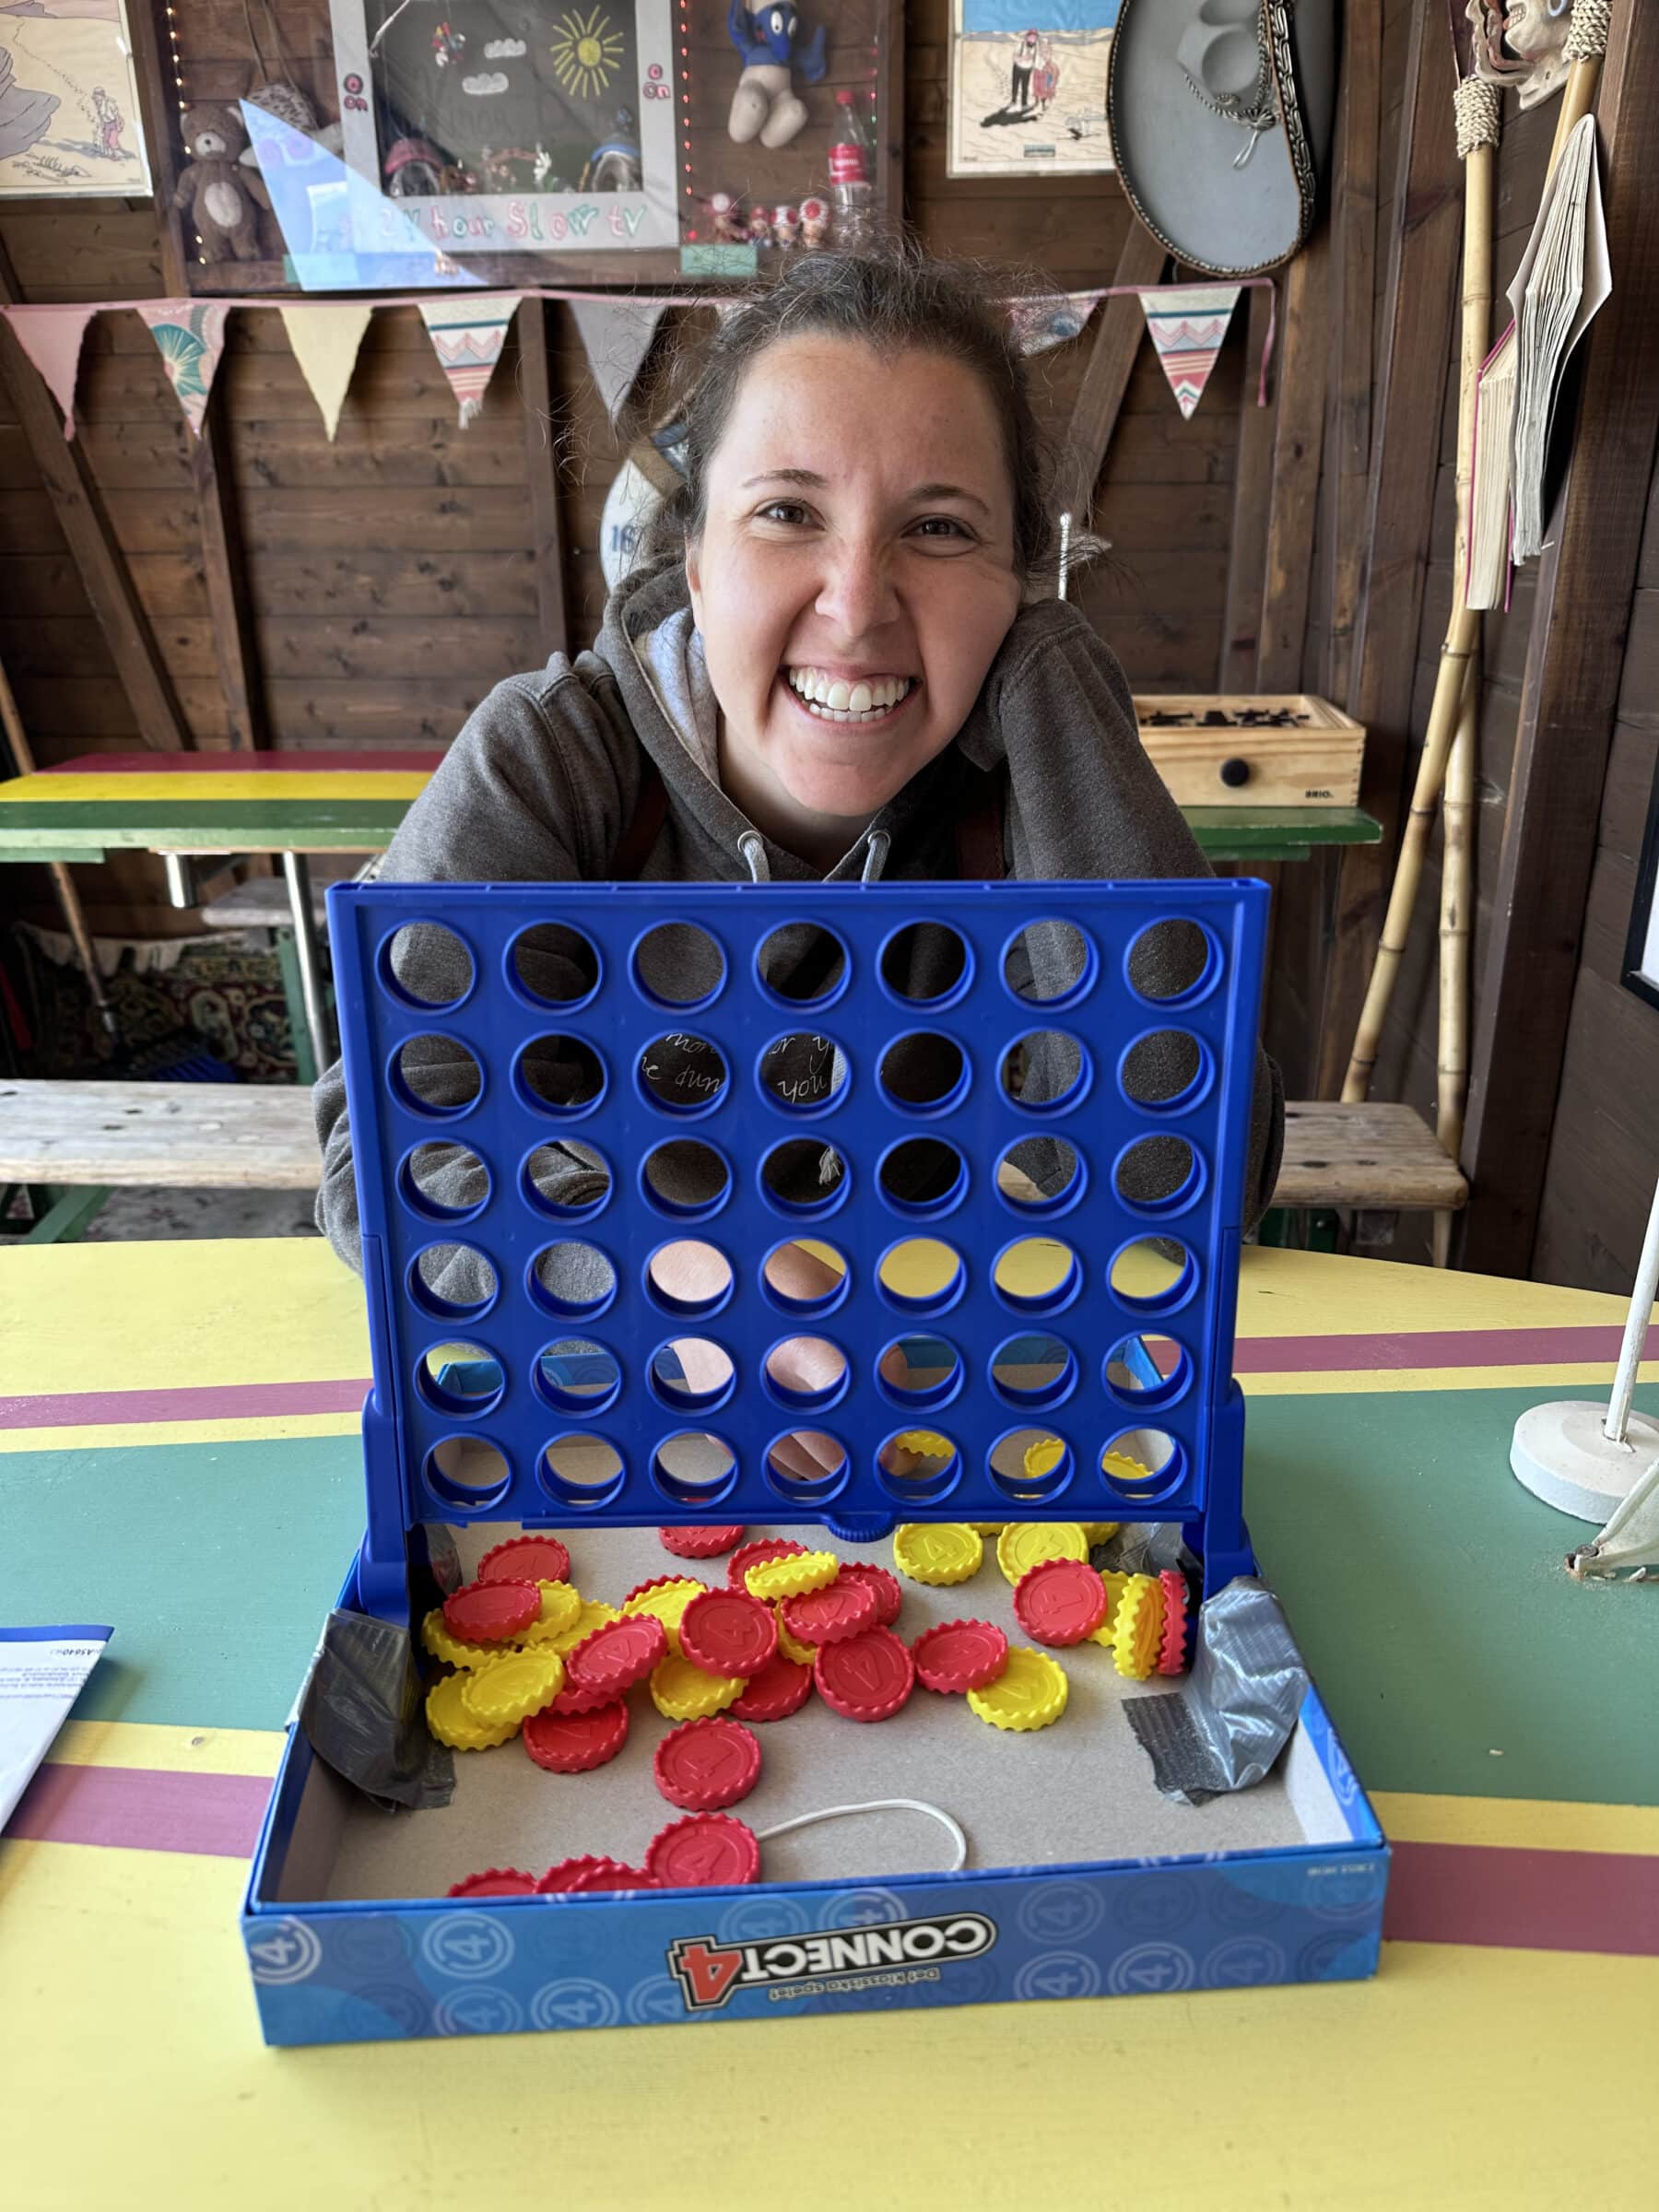 (There's no photo evidence to show that I won this game of Connect 4, but I did win)